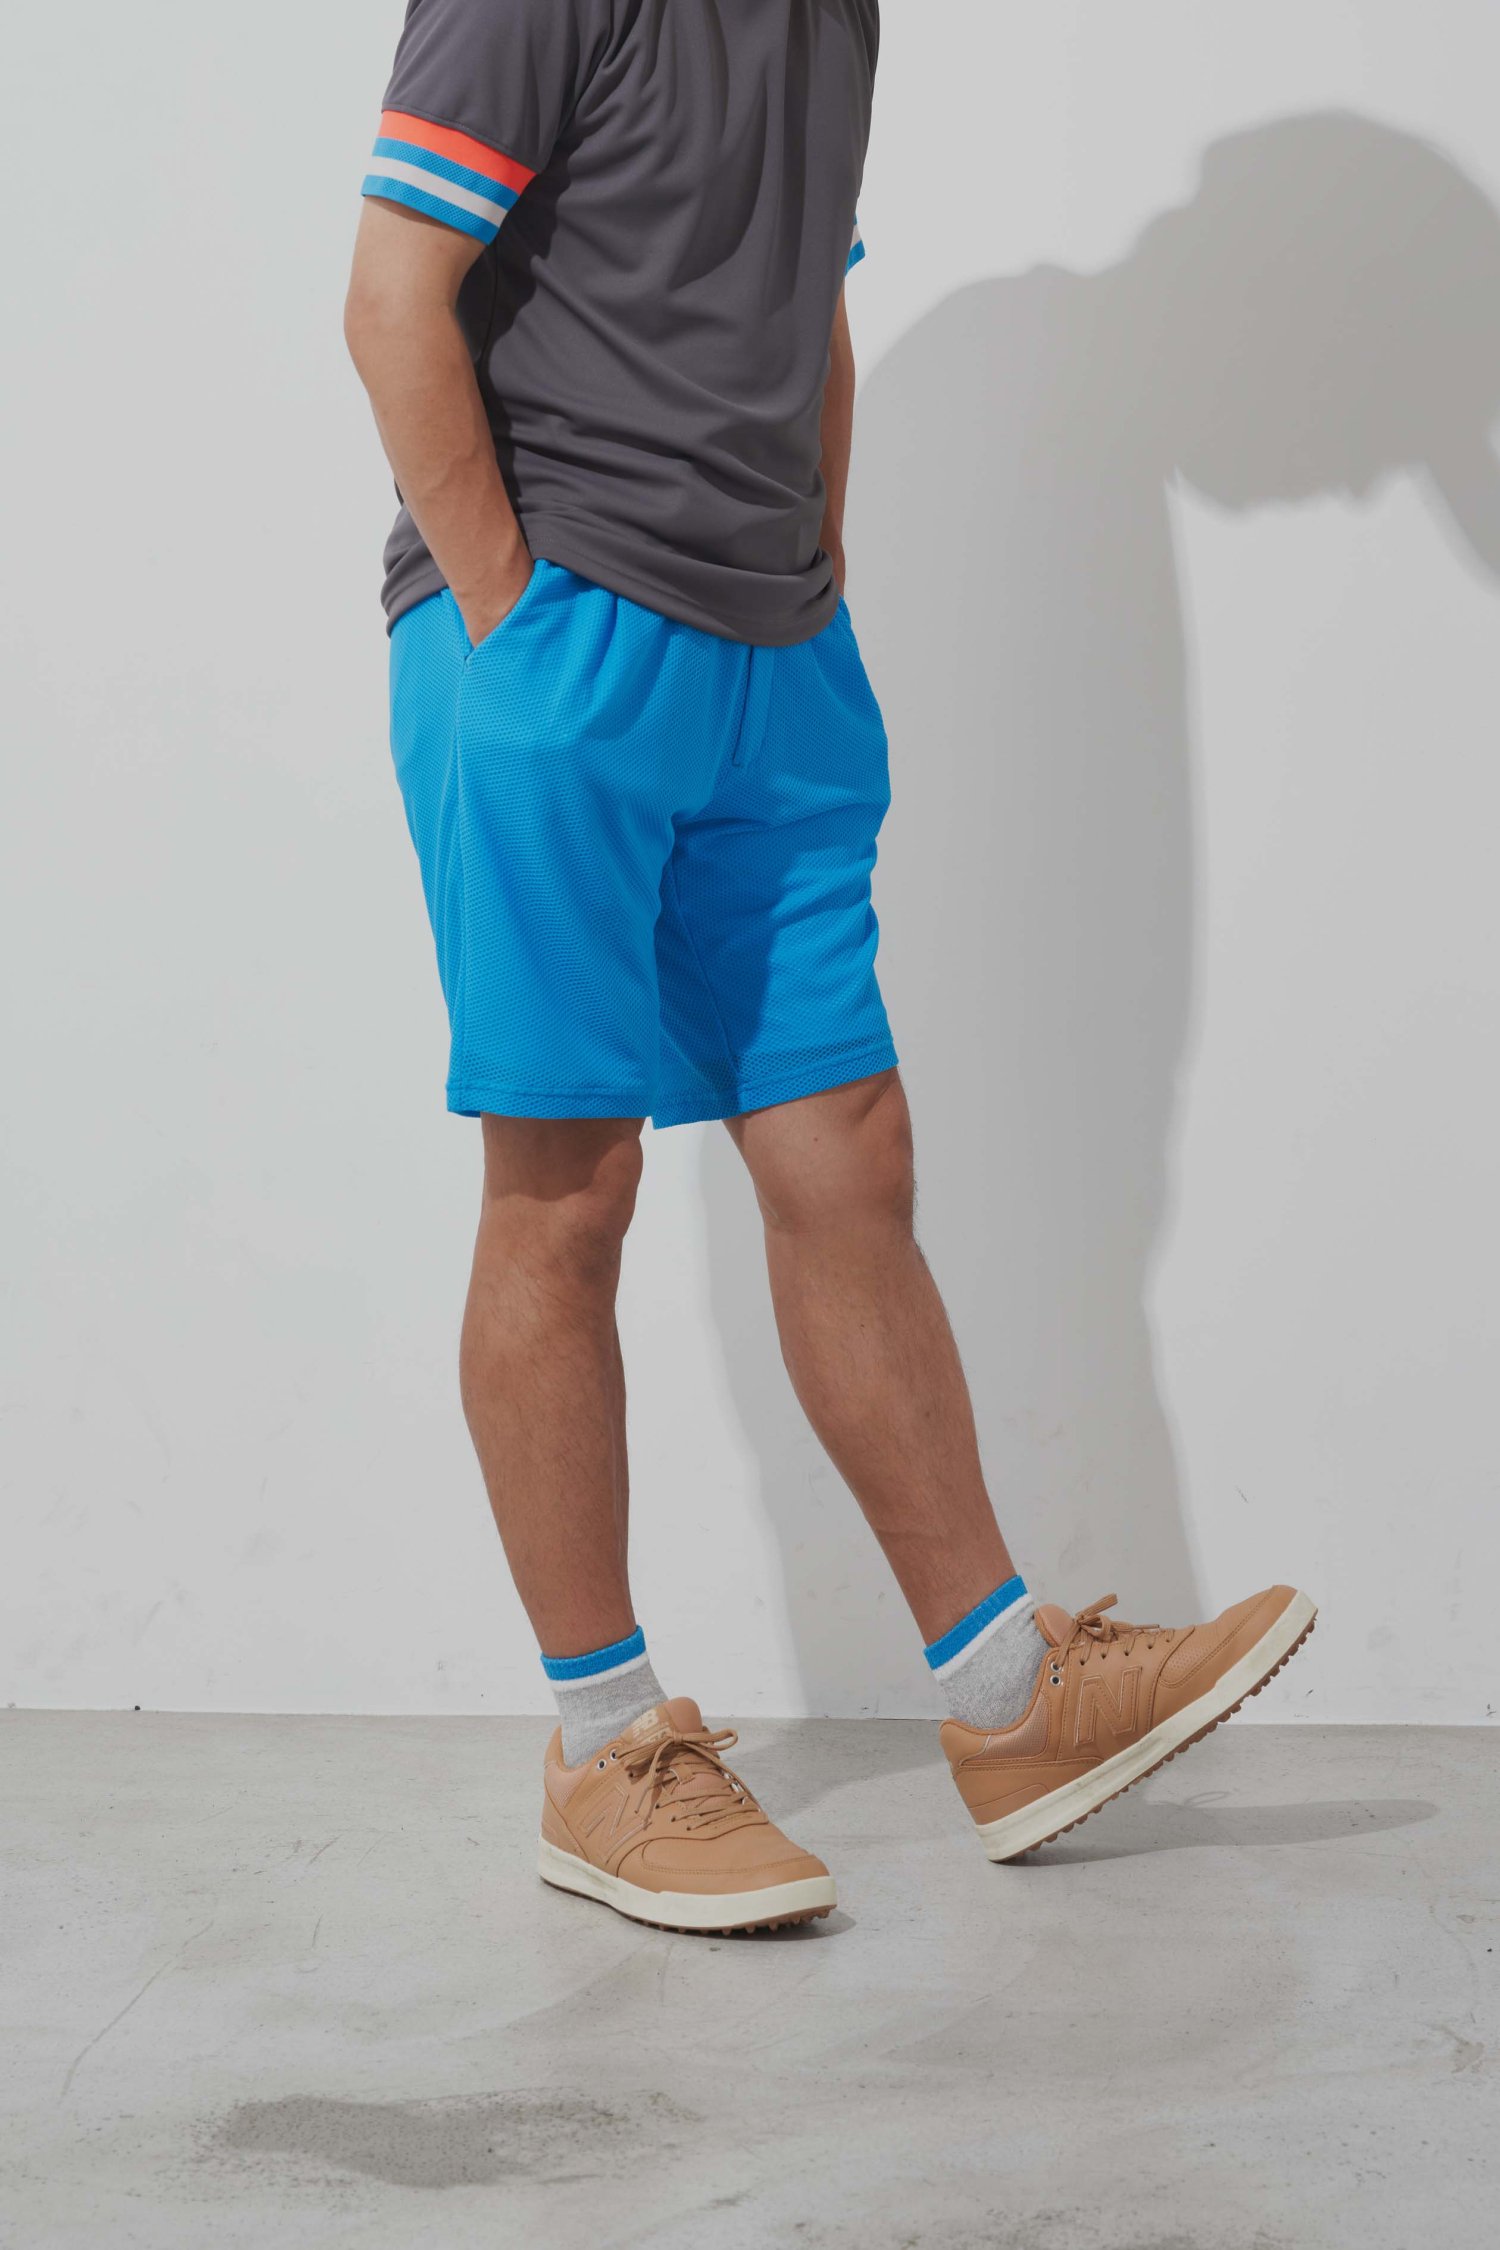 <img class='new_mark_img1' src='https://img.shop-pro.jp/img/new/icons5.gif' style='border:none;display:inline;margin:0px;padding:0px;width:auto;' />Coolness Mesh shorts pants / MAN